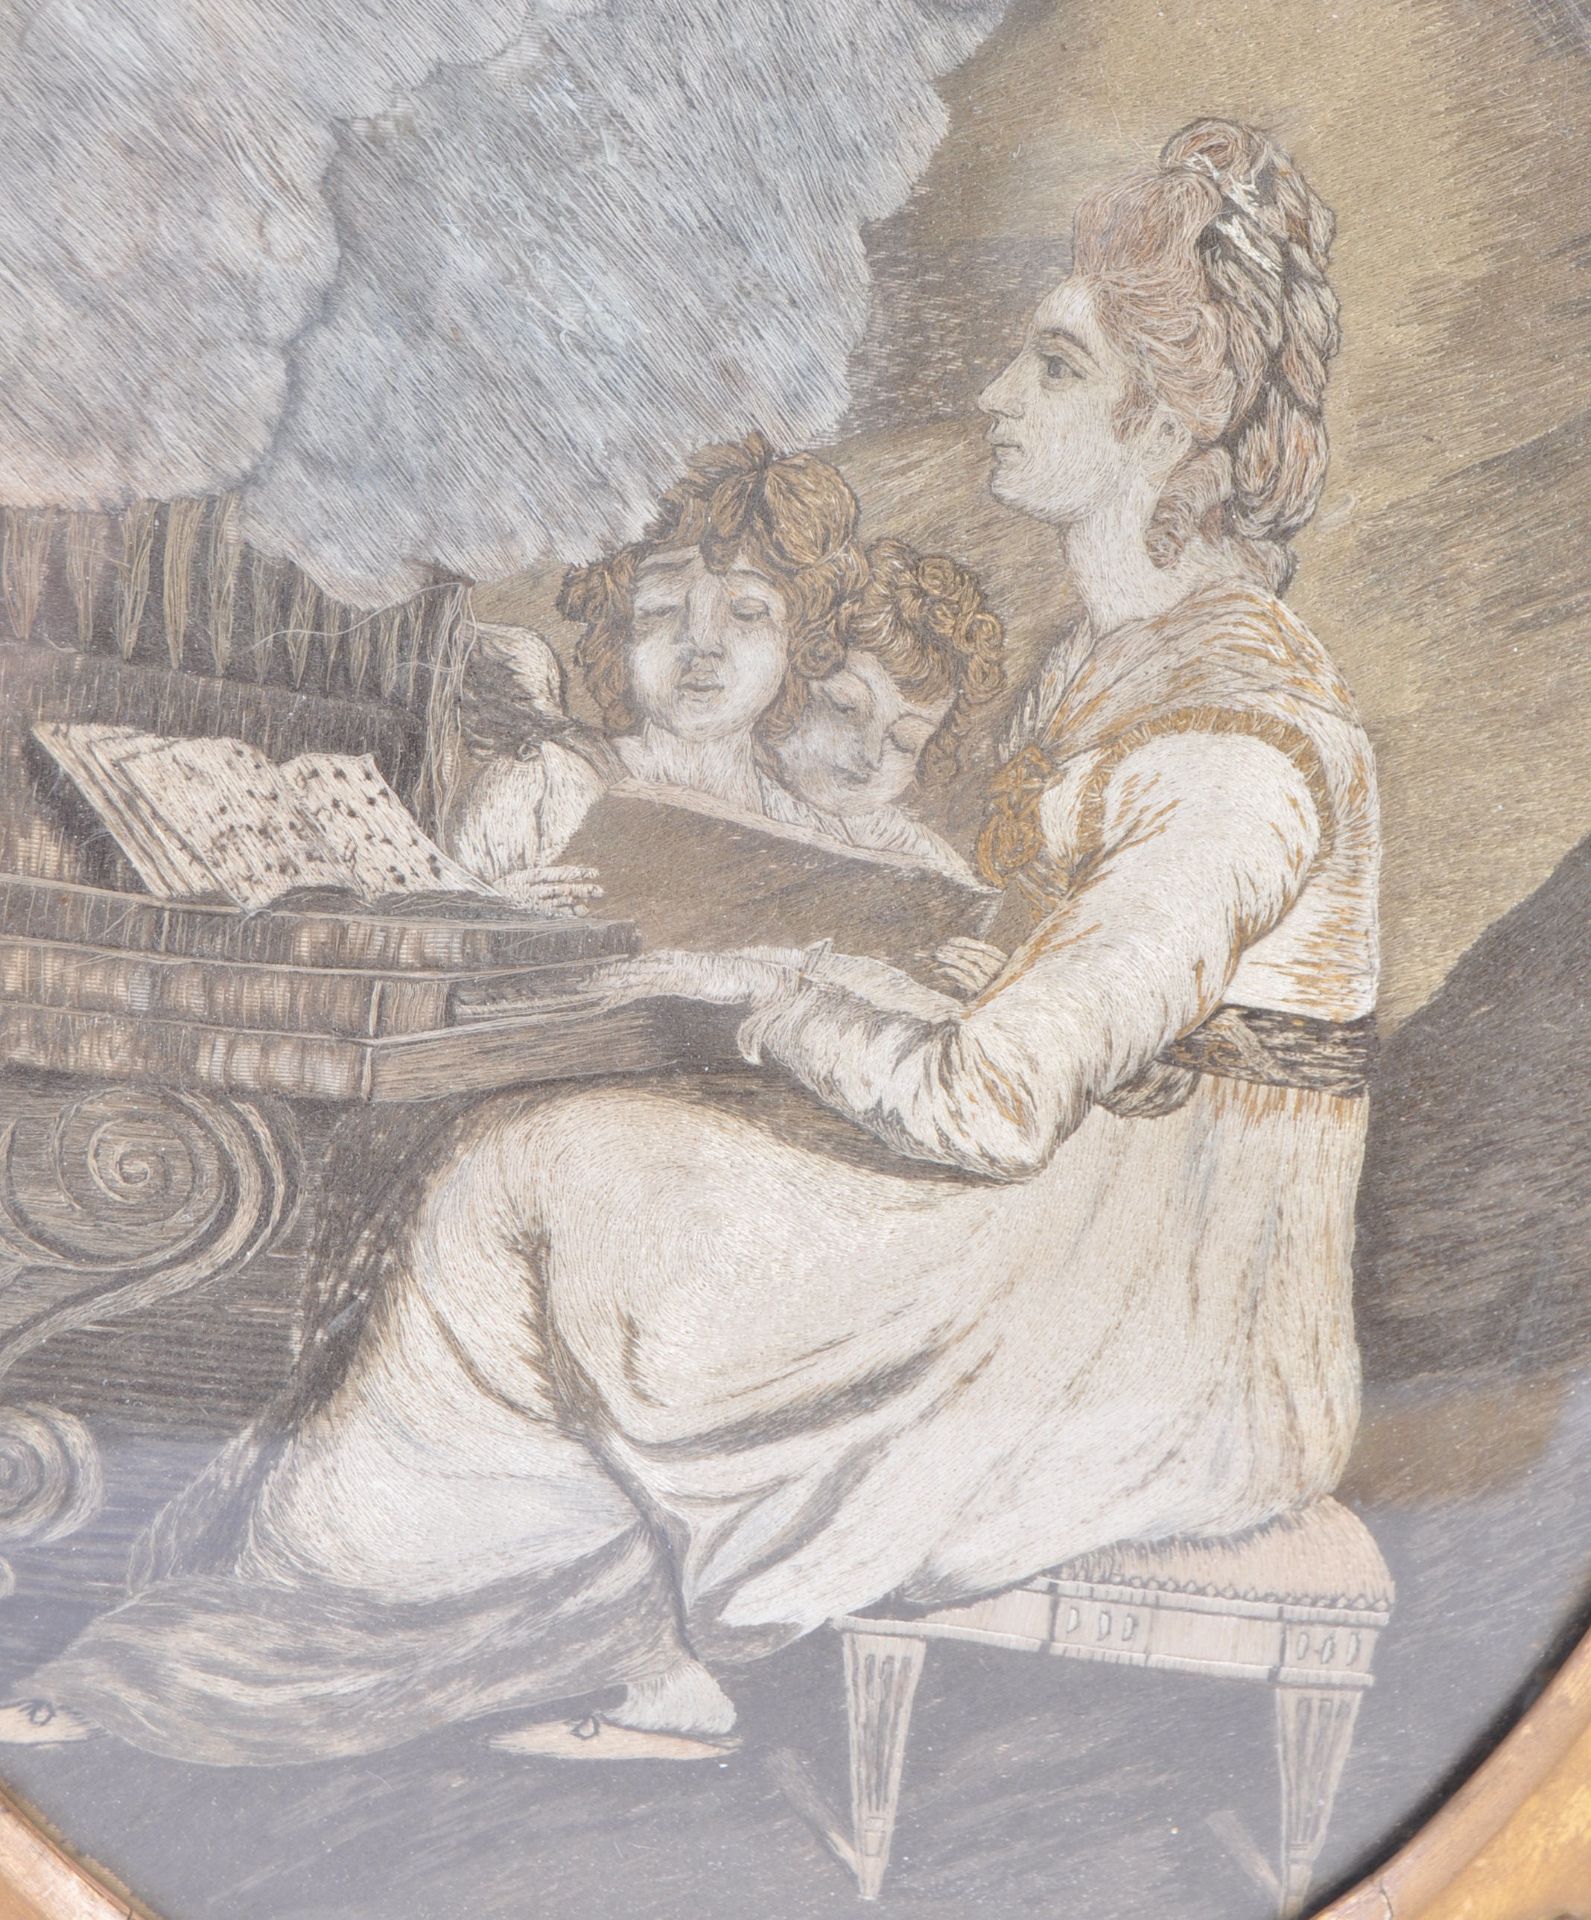 LATE 18TH CENTURY EMBROIDERED PICTURE OF LADY PIANIST - Image 2 of 4